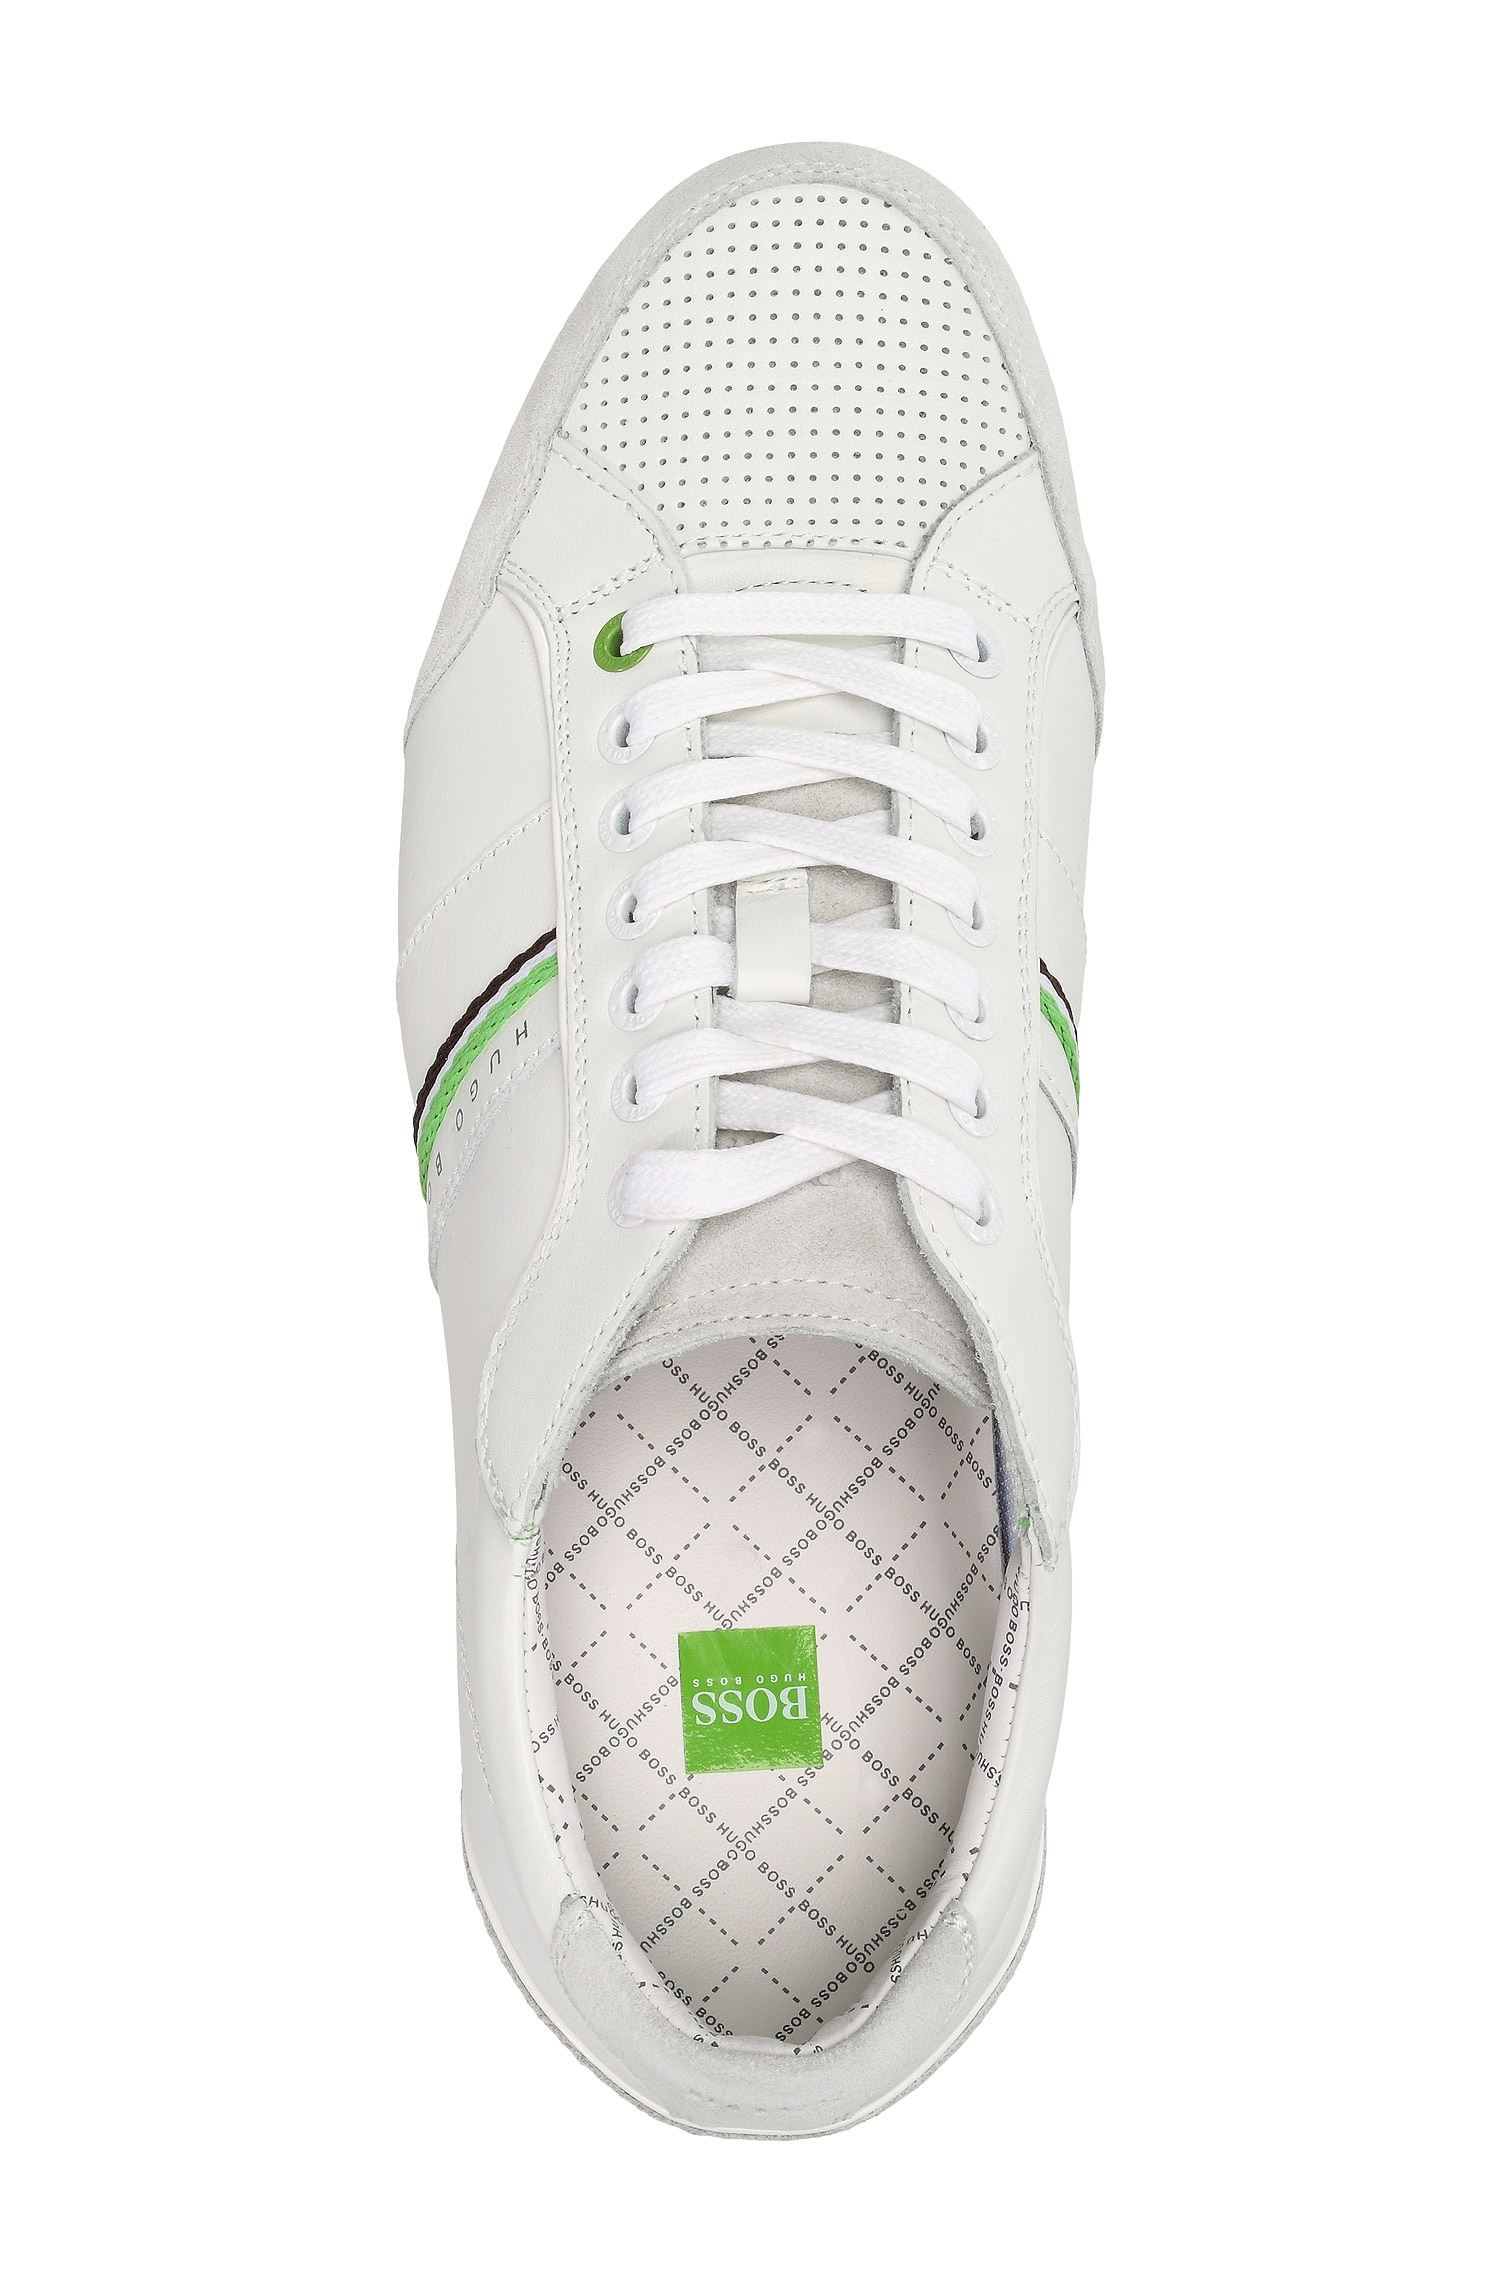 BOSS Green Casual Shoe Victoire La in Natural (White) for Men - Lyst